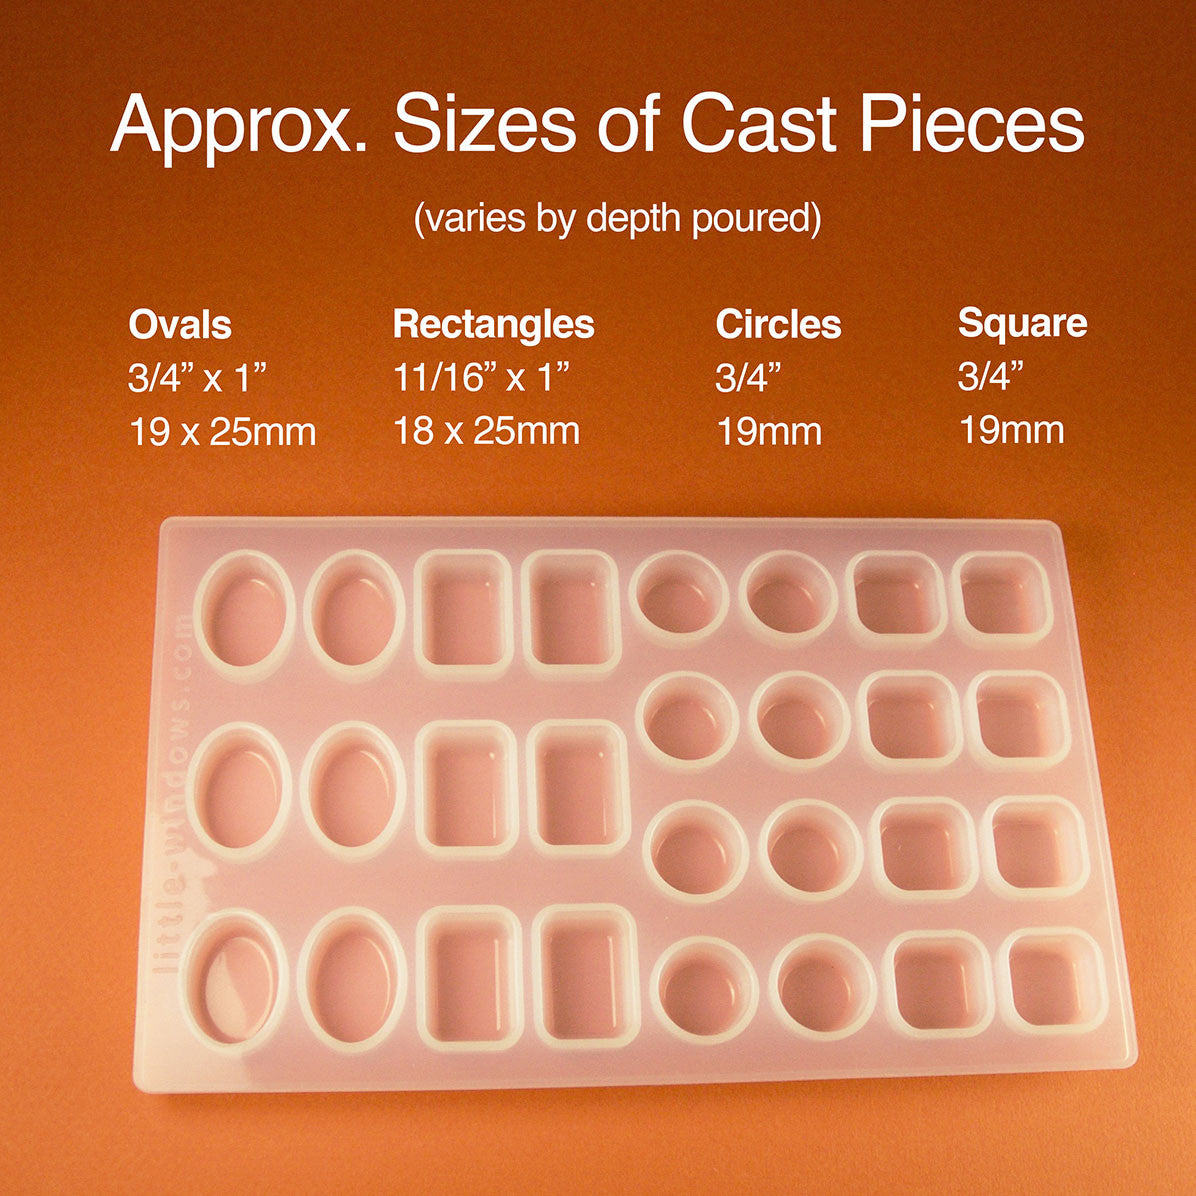 Medium Resin Mold Set, silicone with cropping template (stencil